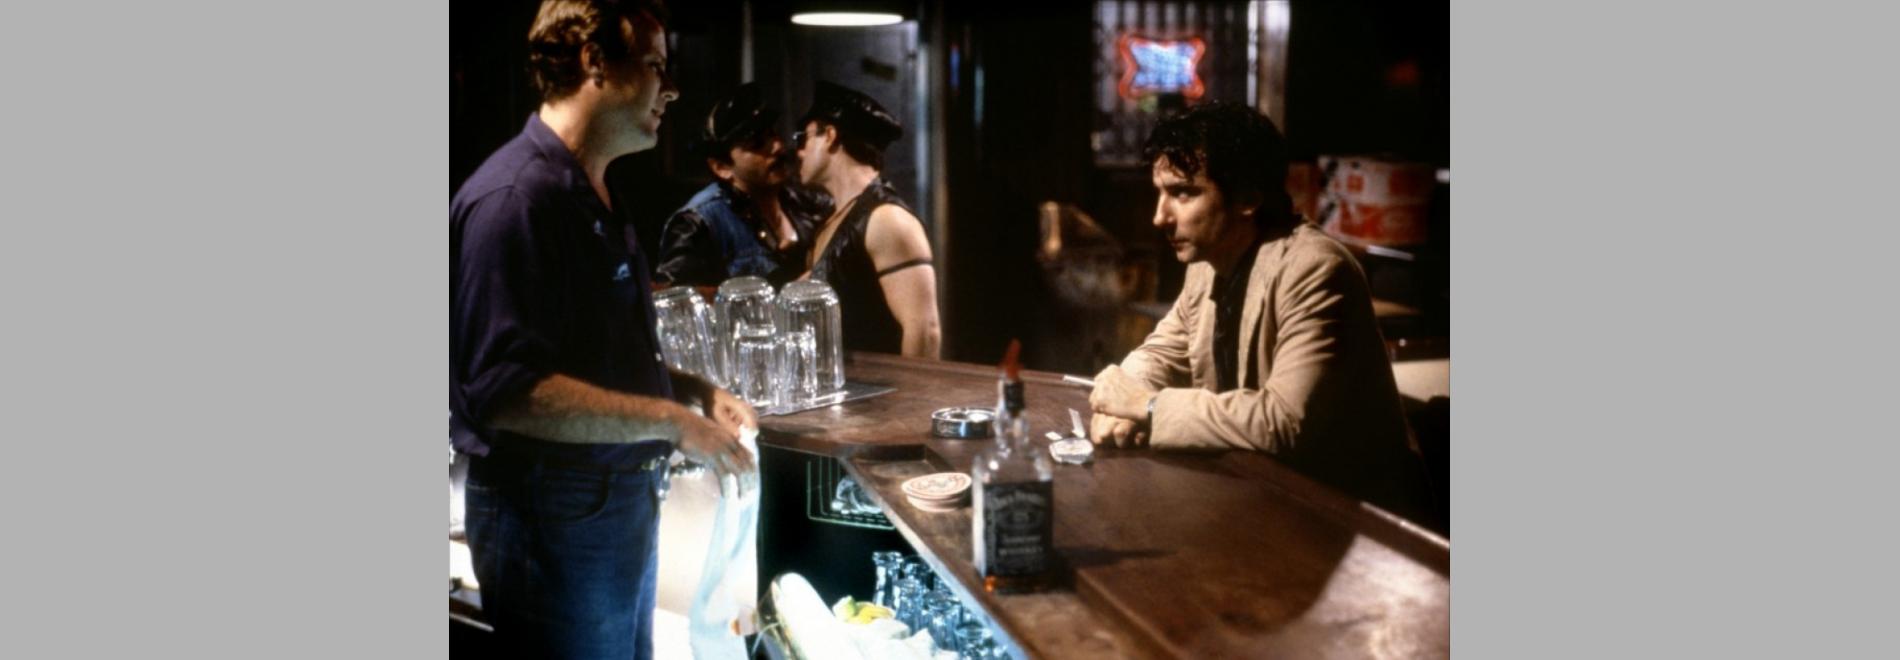 After Hours (Martin Scorsese, 1985)